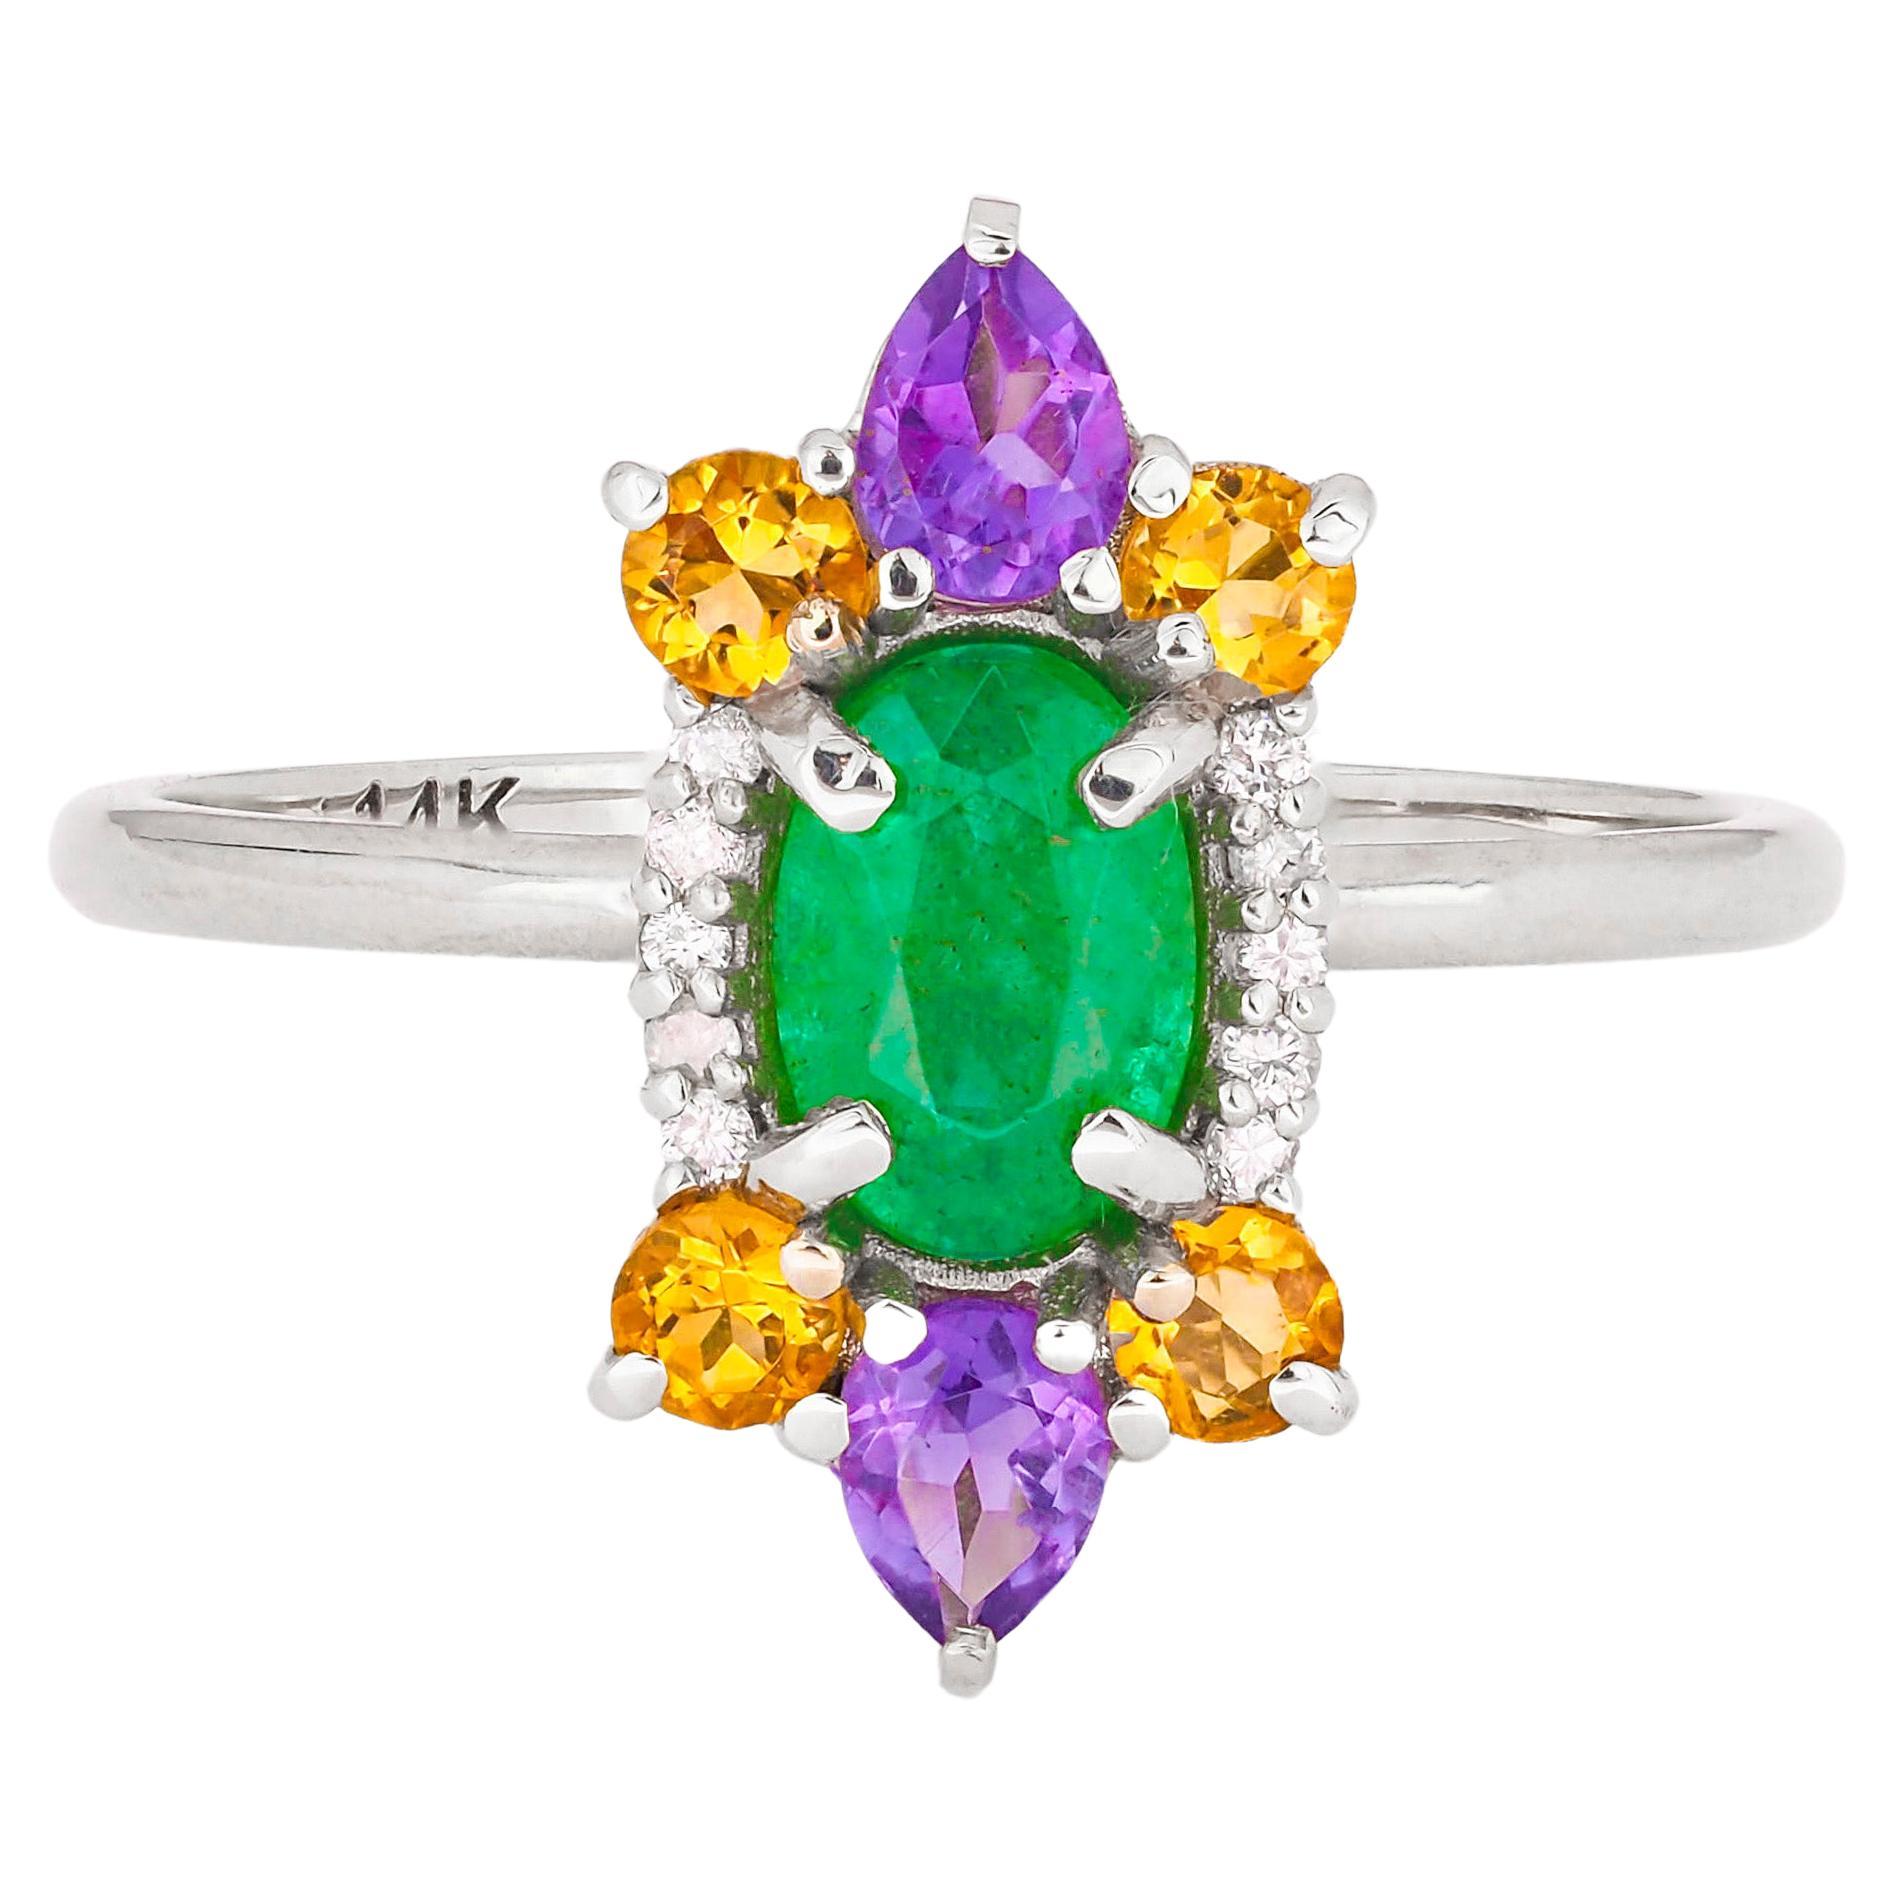 For Sale:  14 K Gold Ring with Oval Emerald, Sapphires, Amethysts and Diamonds!